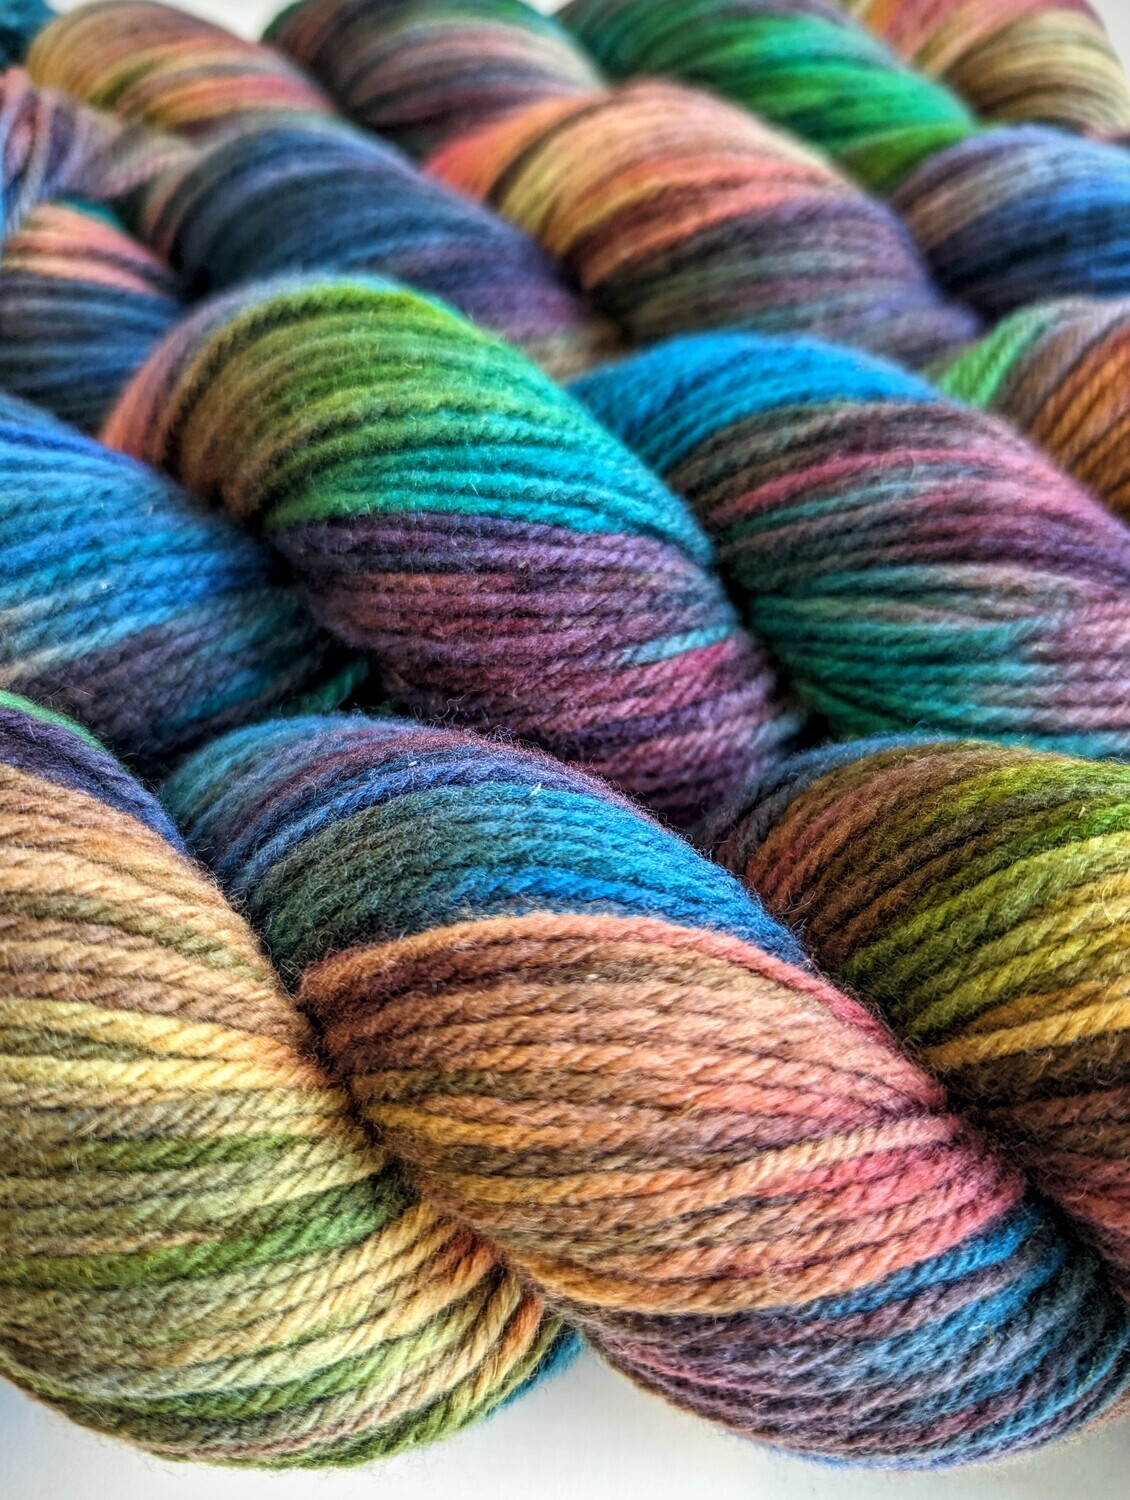 special dyed multicolor yarn rainbow hand